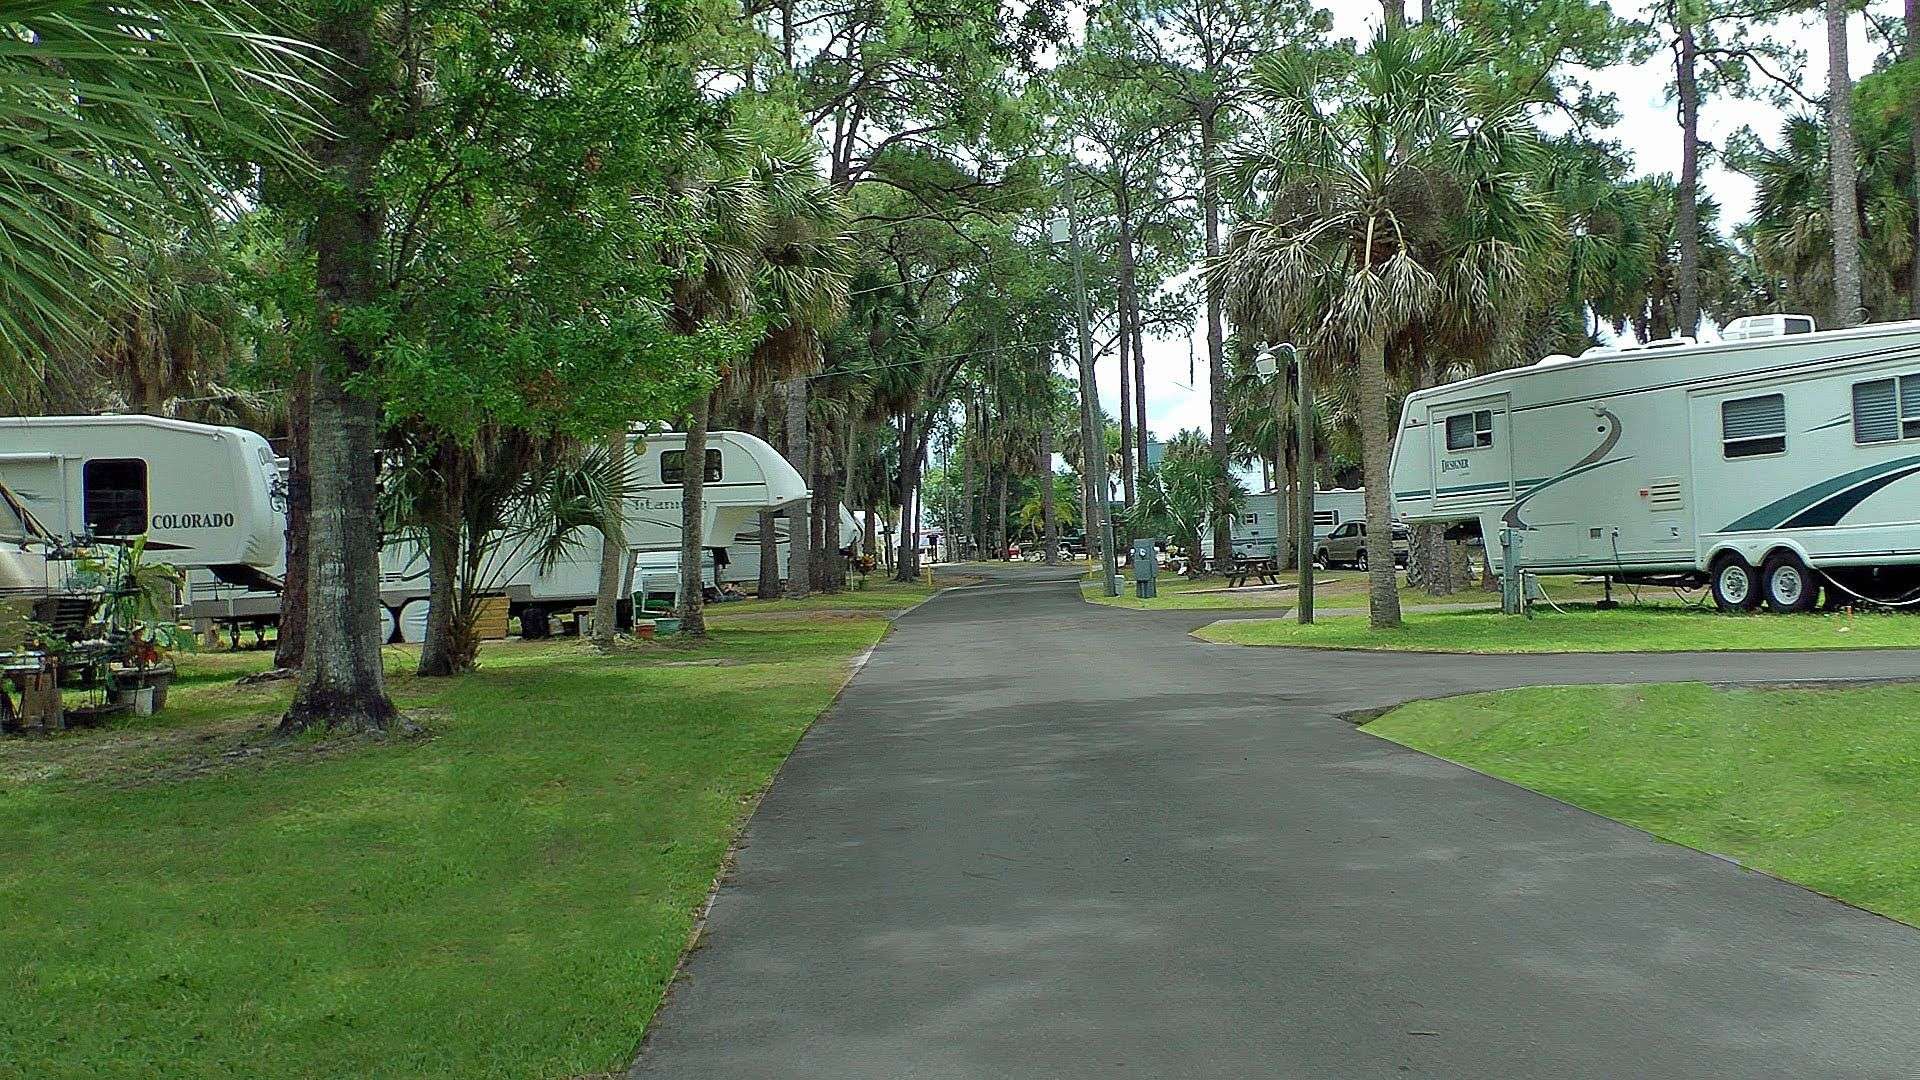 amping In Florida at the Suncoast RV Resort. If you are ...